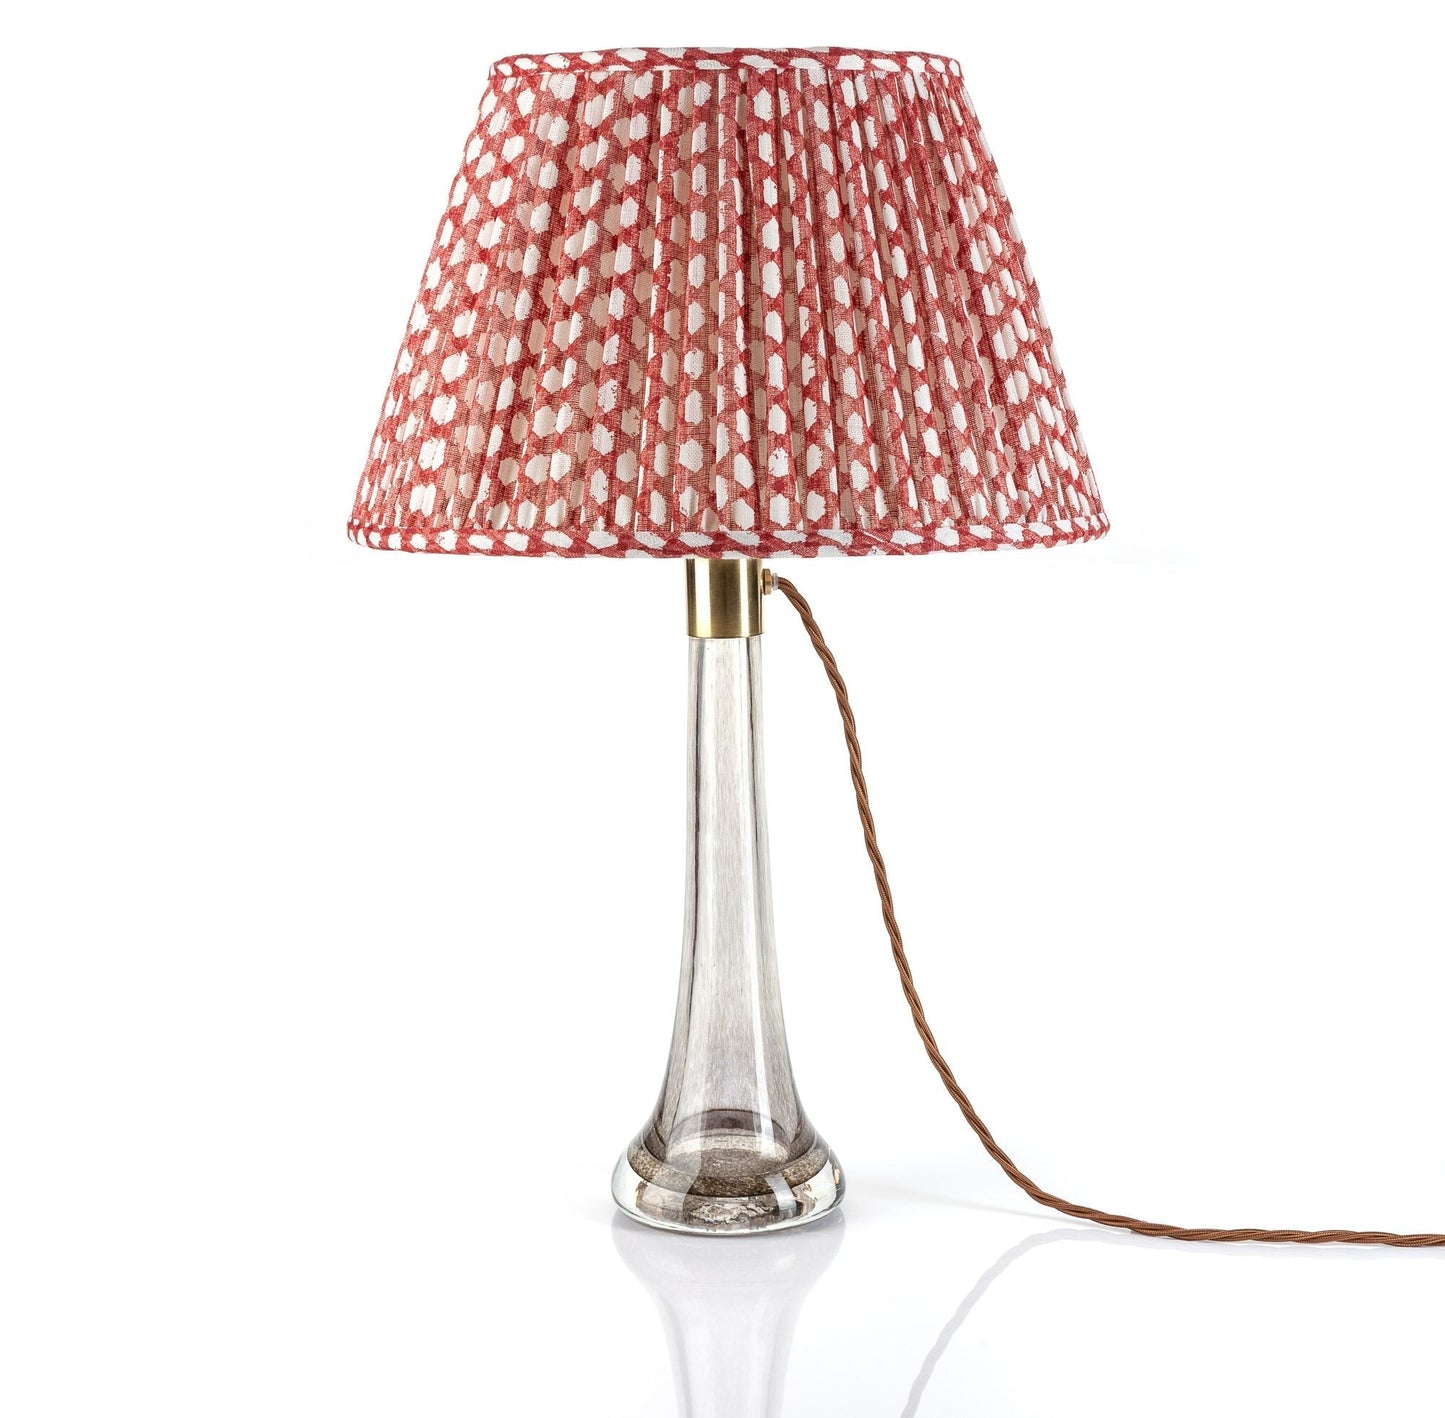 Lampshade in Red Wicker Light Linen